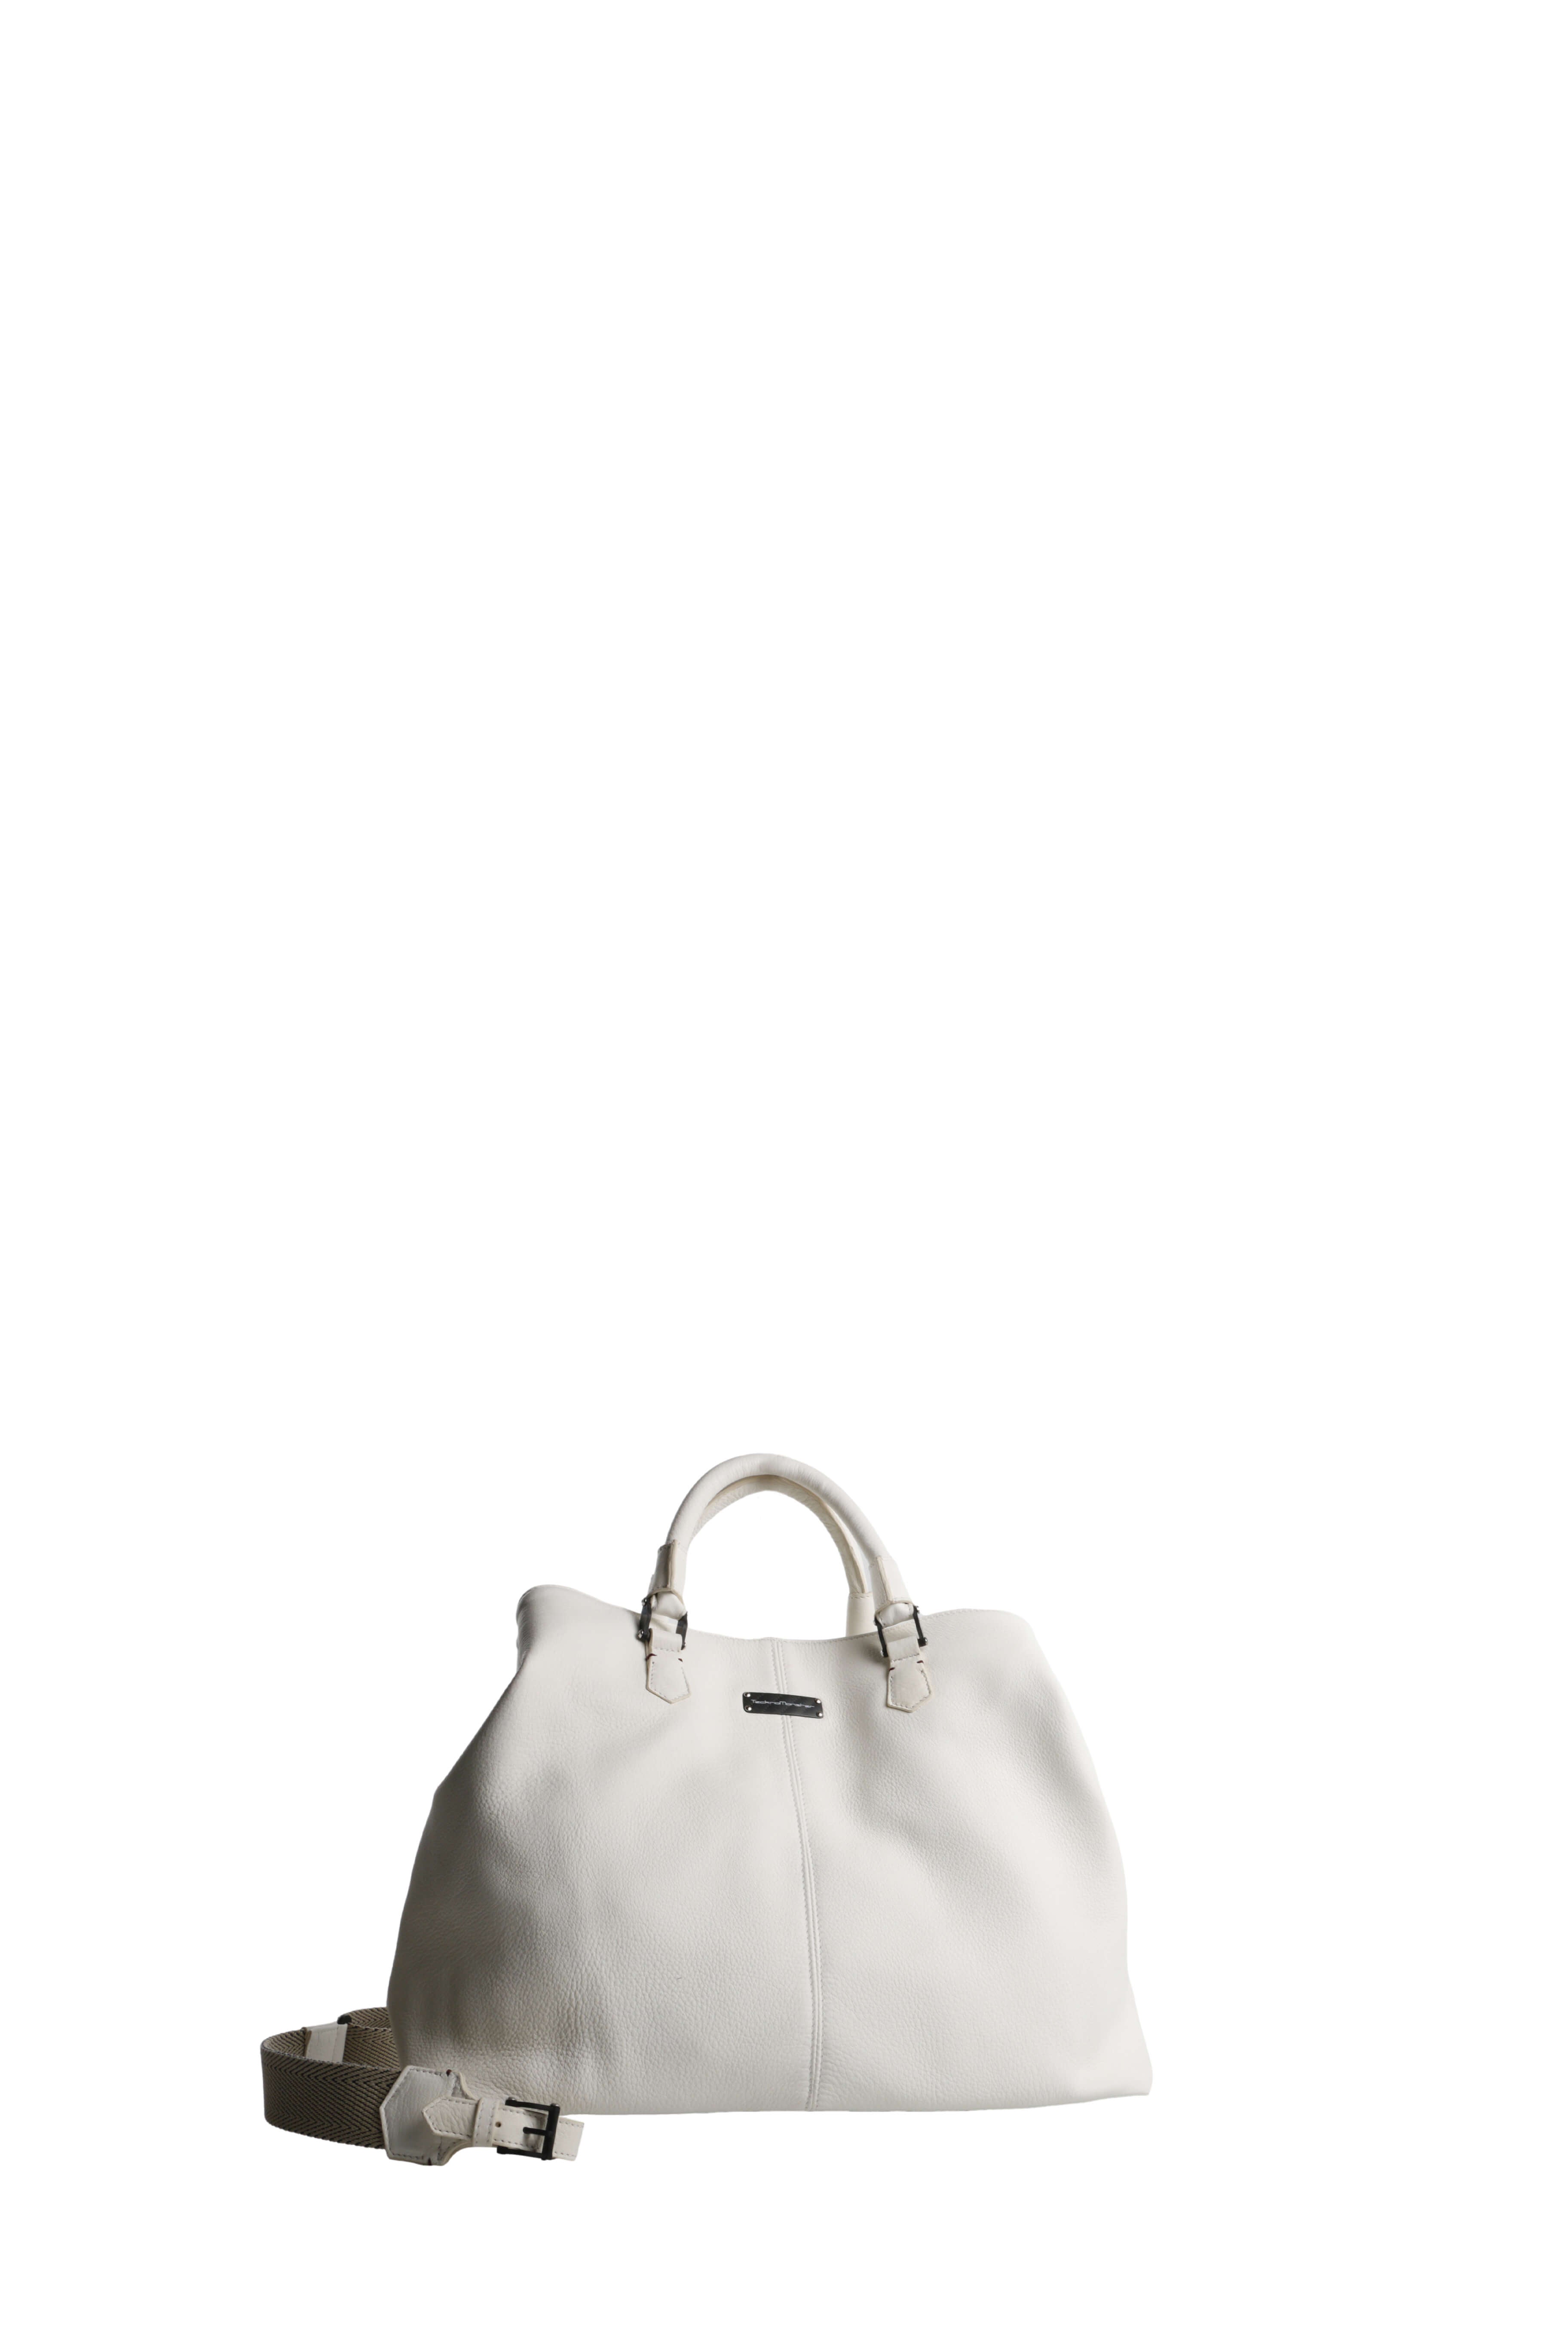 Ormeggia Deer Leather Day Bag, White